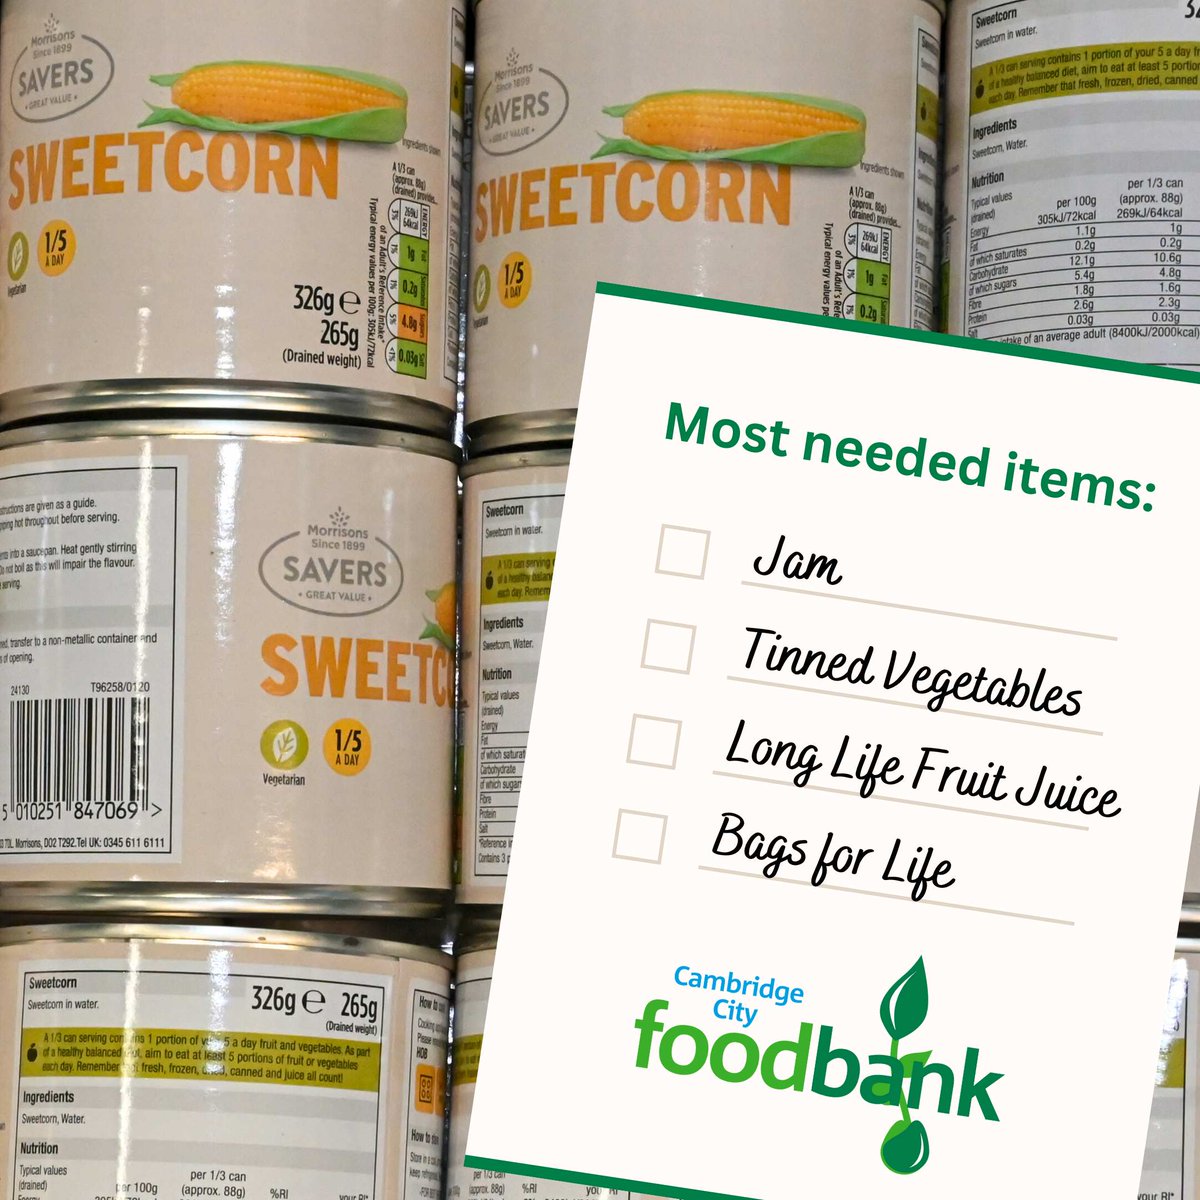 #FoodInsecurity is still common in the #Cambridge community. To win this fight, we all need to work together. This week, we’re in need of some key items for our visitors. If you can #donate from the list below, please do💚